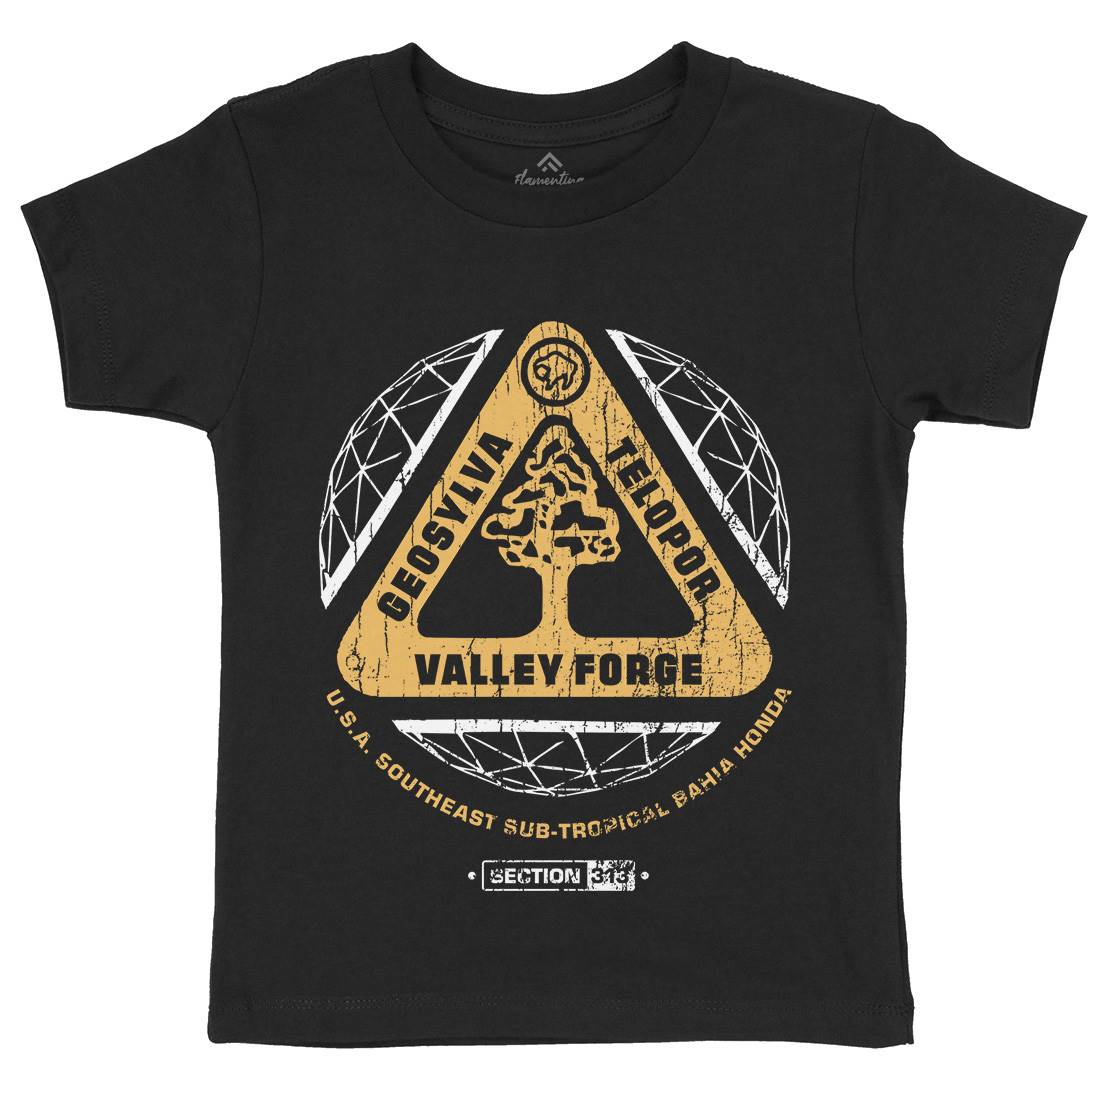 Valley Forge Kids Organic Crew Neck T-Shirt Space D200